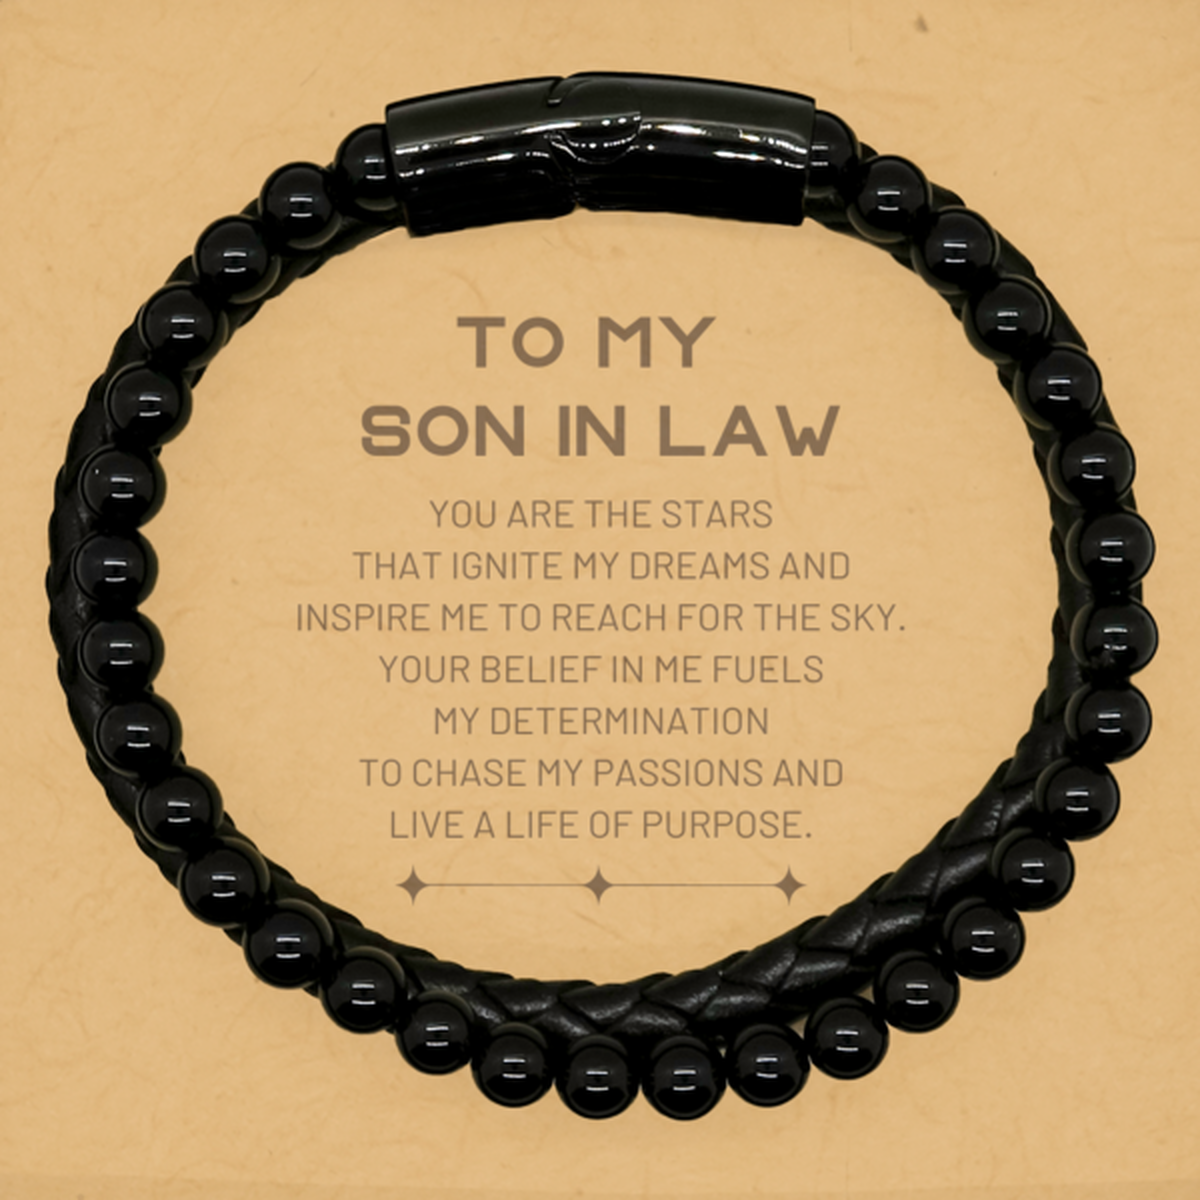 To My Son In Law Stone Leather Bracelets, You are the stars that ignite my dreams and inspire me to reach for the sky, Birthday Unique Gifts For Son In Law, Thank You Gifts For Son In Law